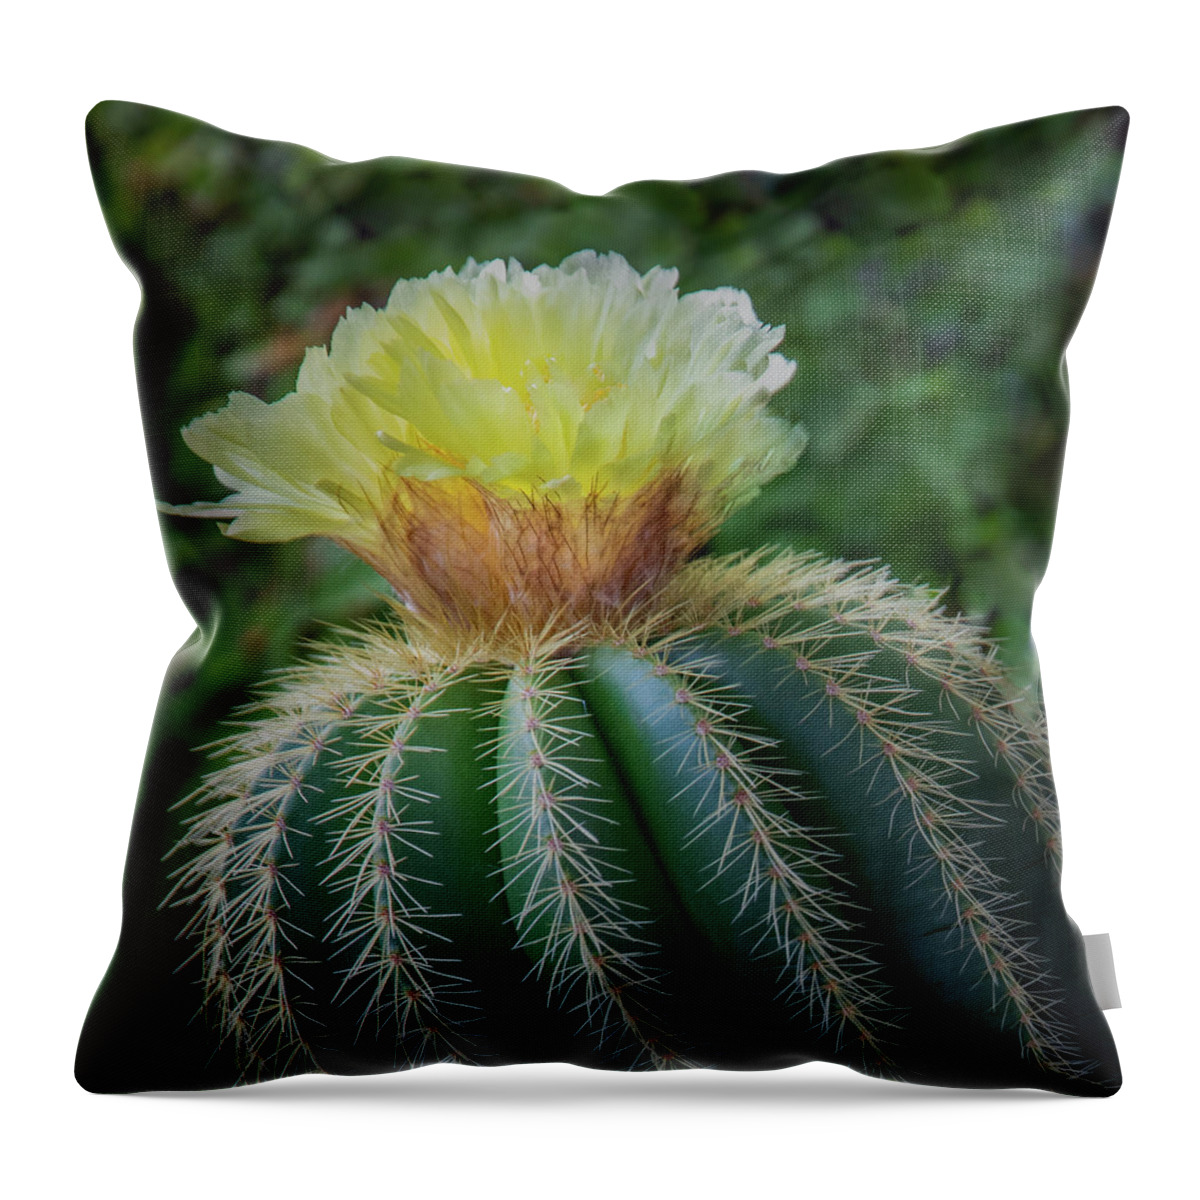 Blooming Throw Pillow featuring the photograph Blooming Cactus by James Woody